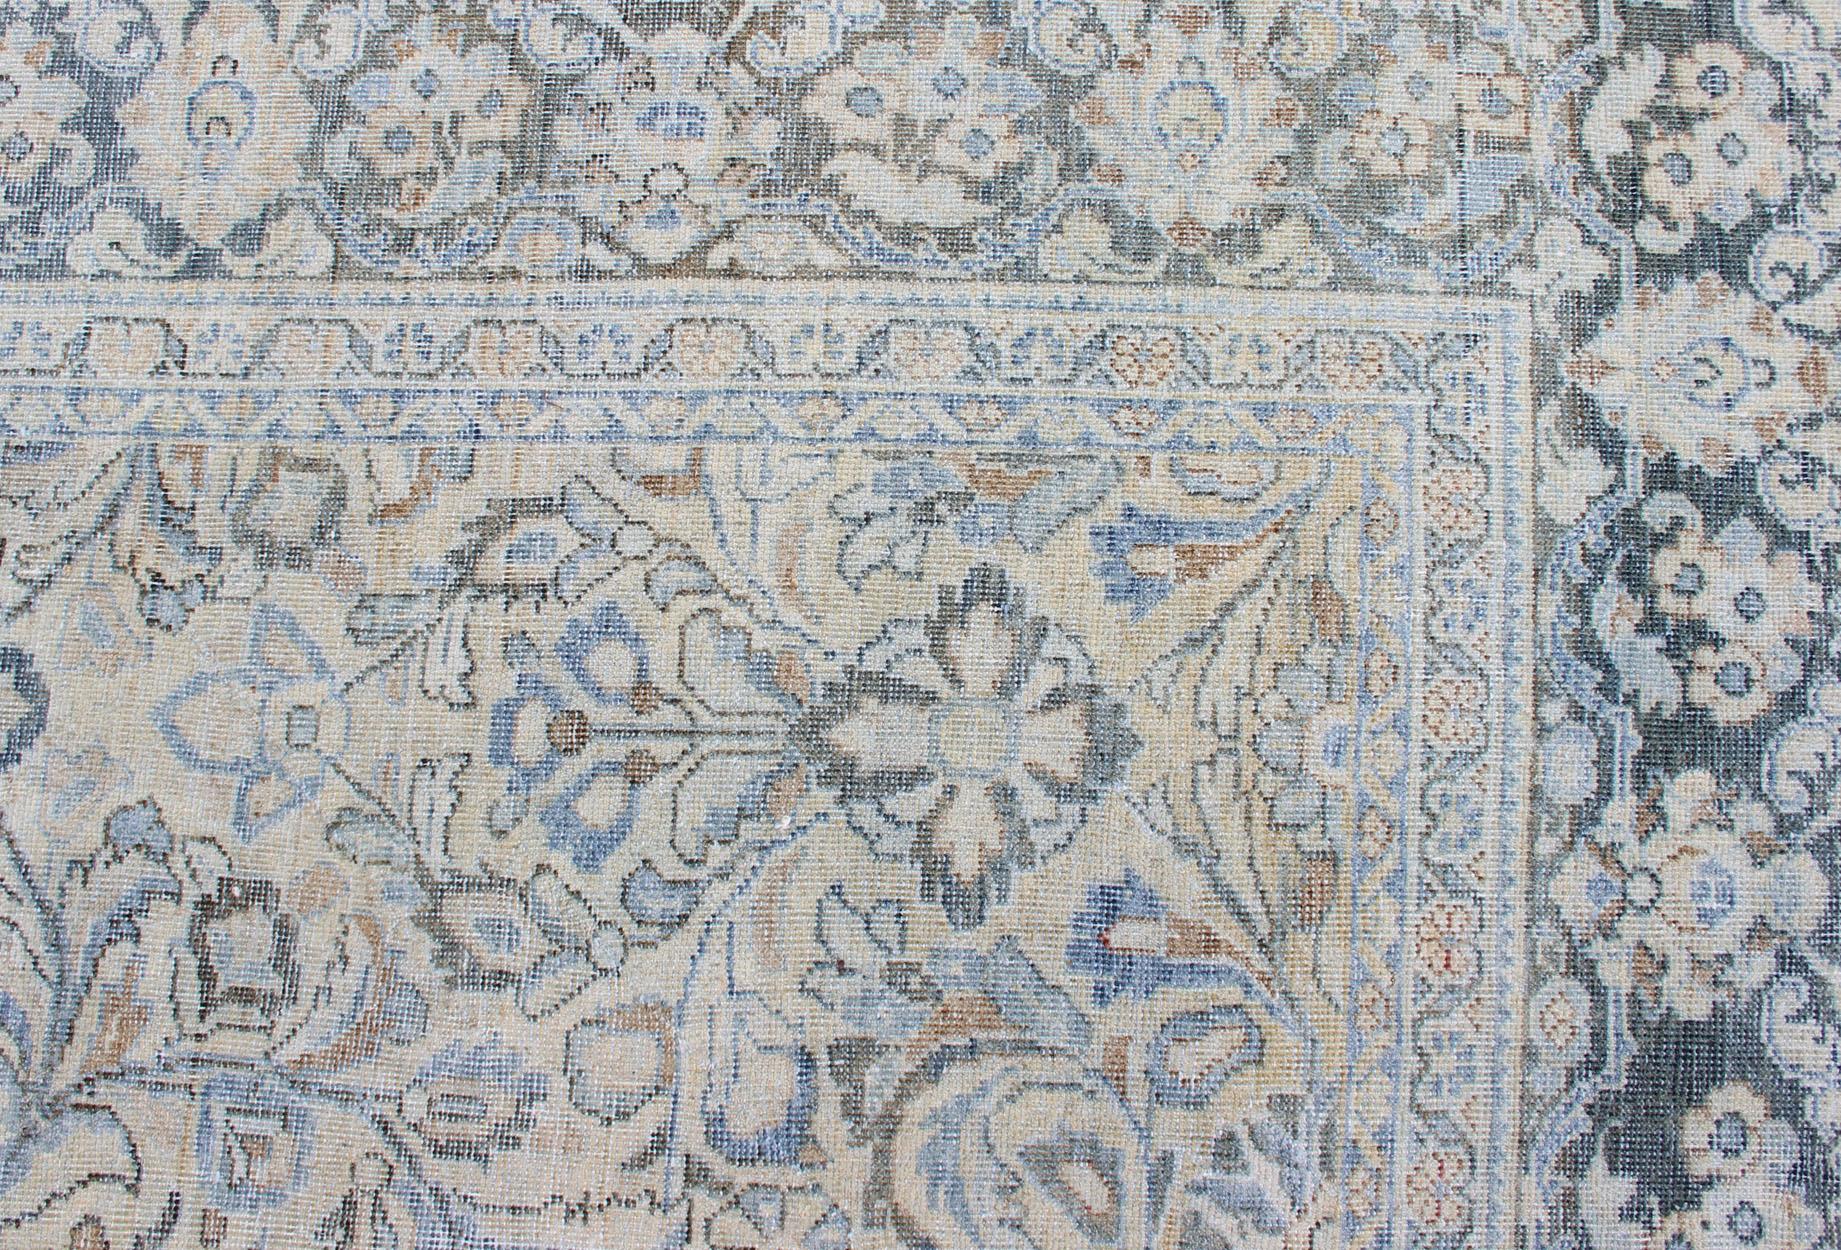 Antique Persian Mahal Rug with Sub Floral Design in Blue, Charcoal & Cream 8